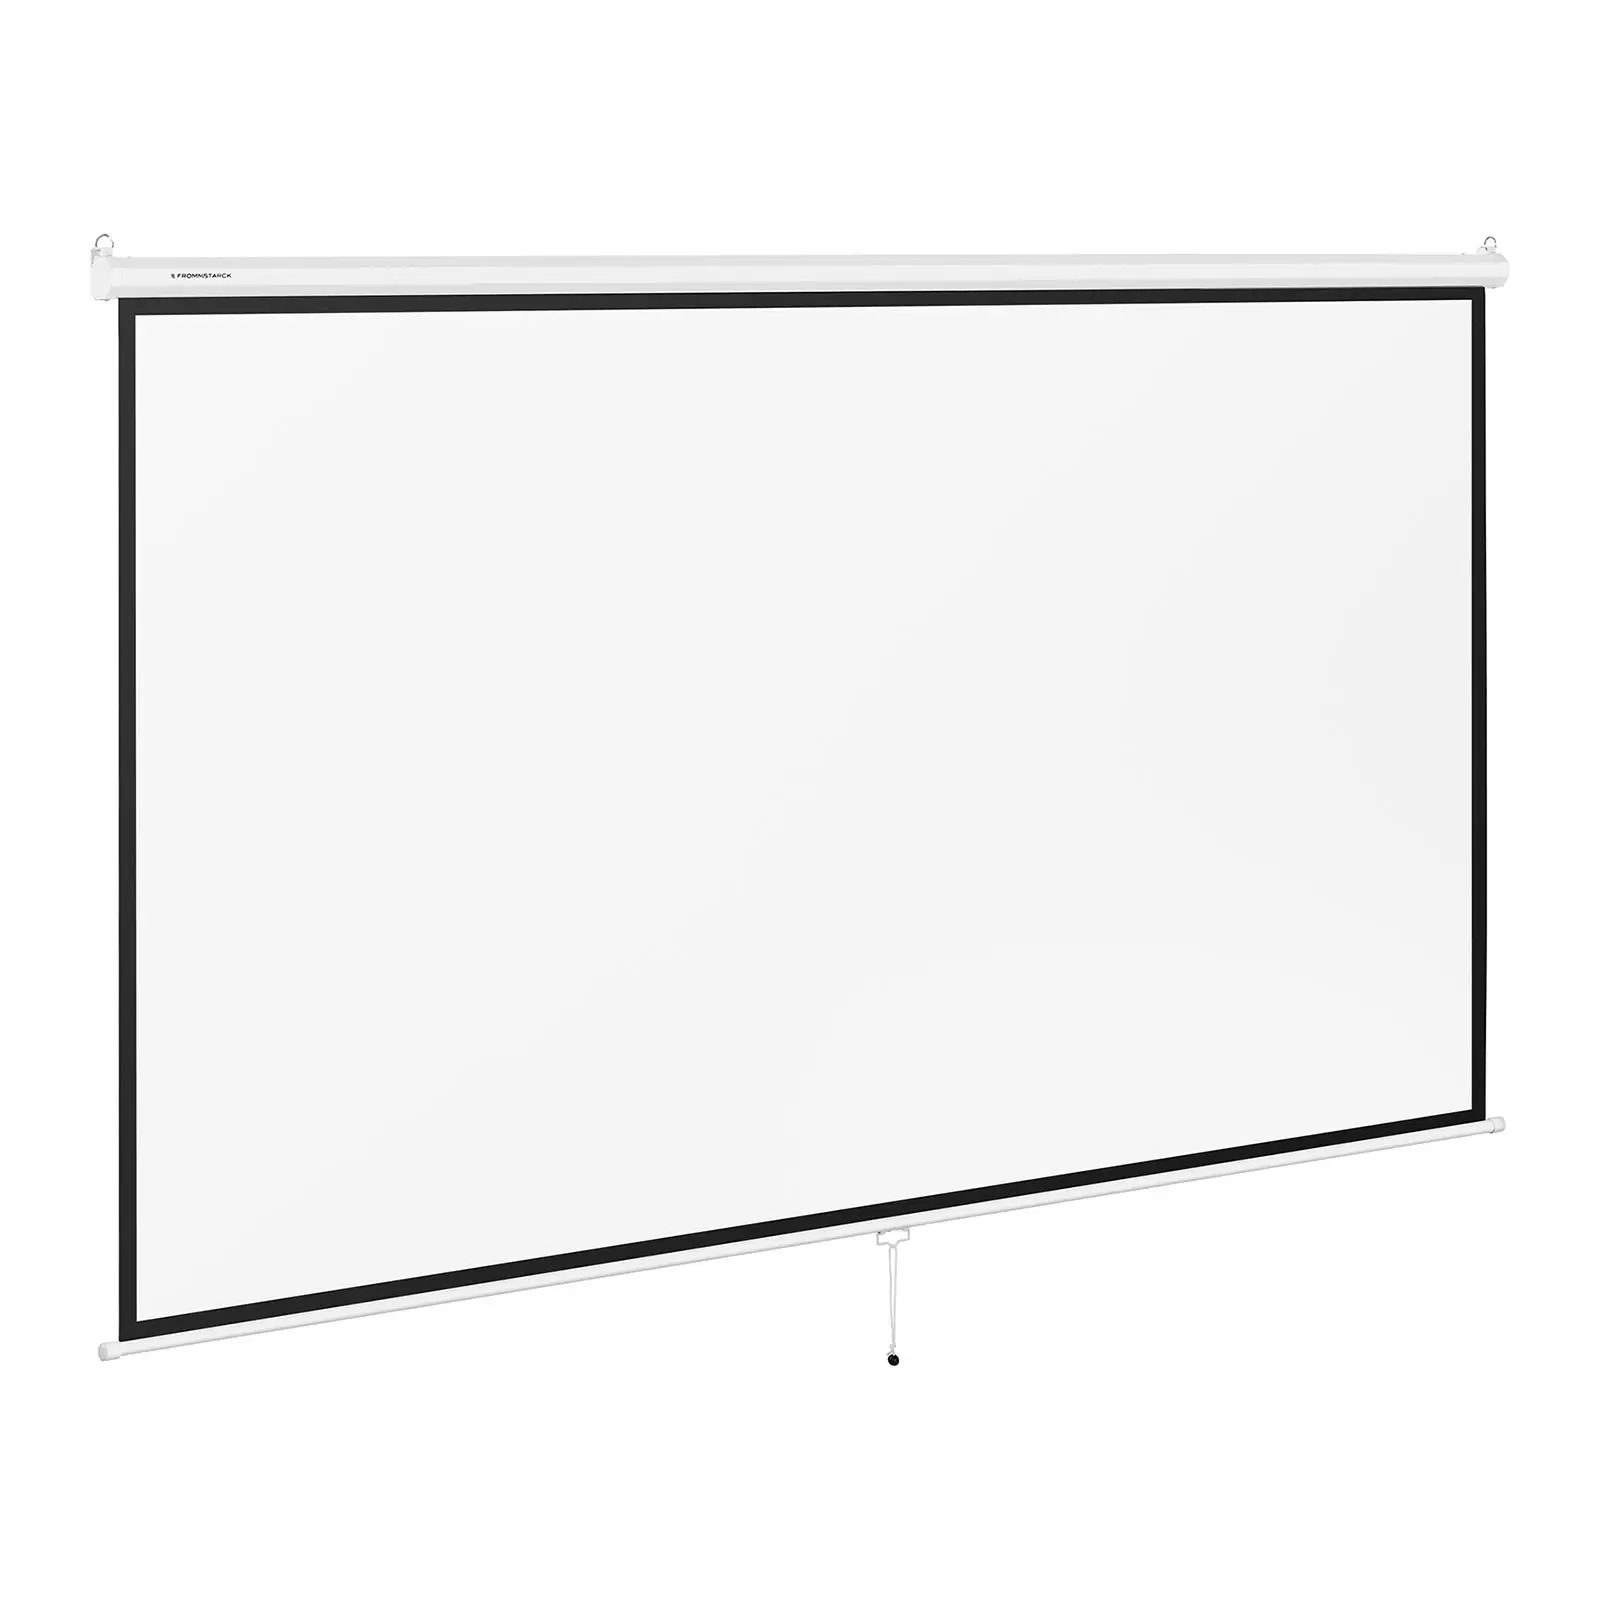 Projection Screen - 340 x 210 cm - 16:9